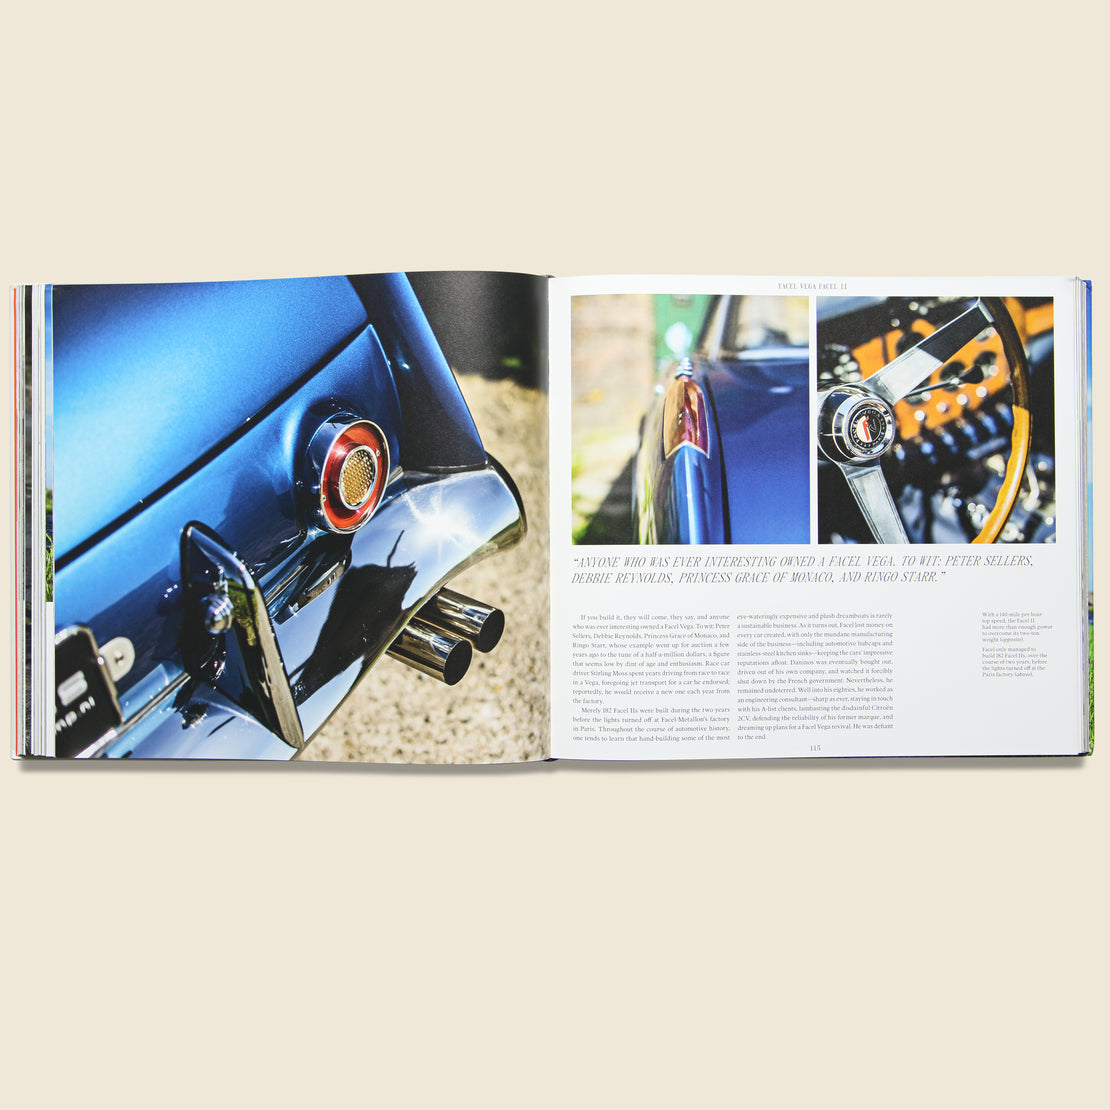 Beautiful Machines: The Era of the Elegant Sports Car - Bookstore - STAG Provisions - Home - Library - Book